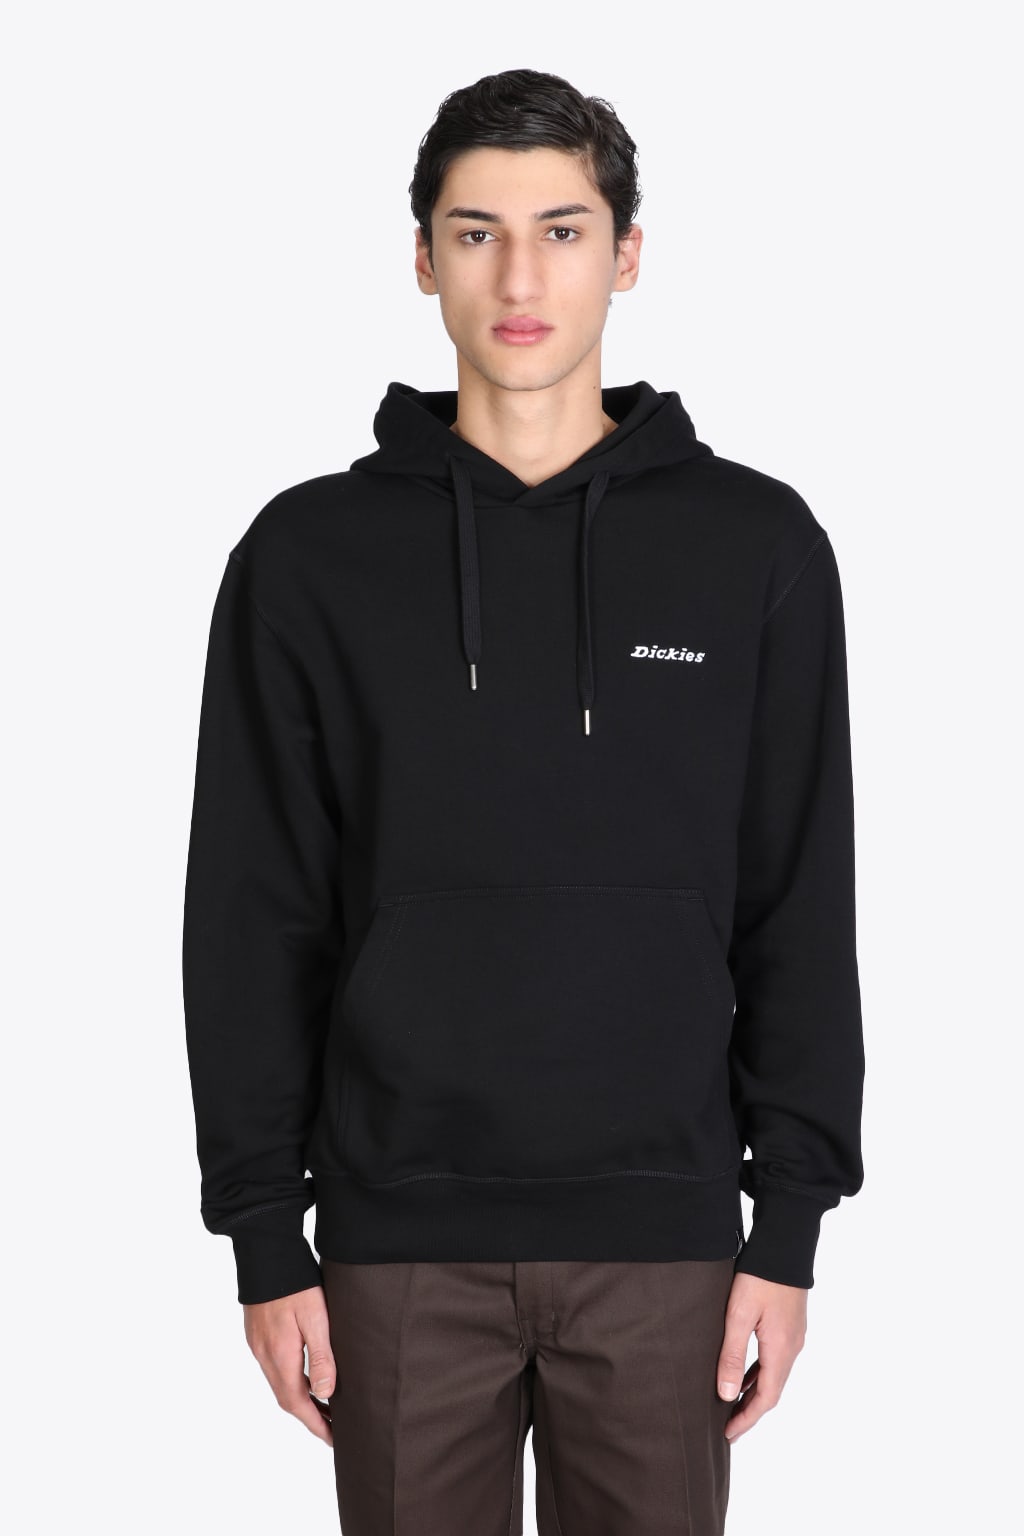 Dickies Loretto Hoodie Black cotton hoodie with logo embroidery - Loretto hoodie